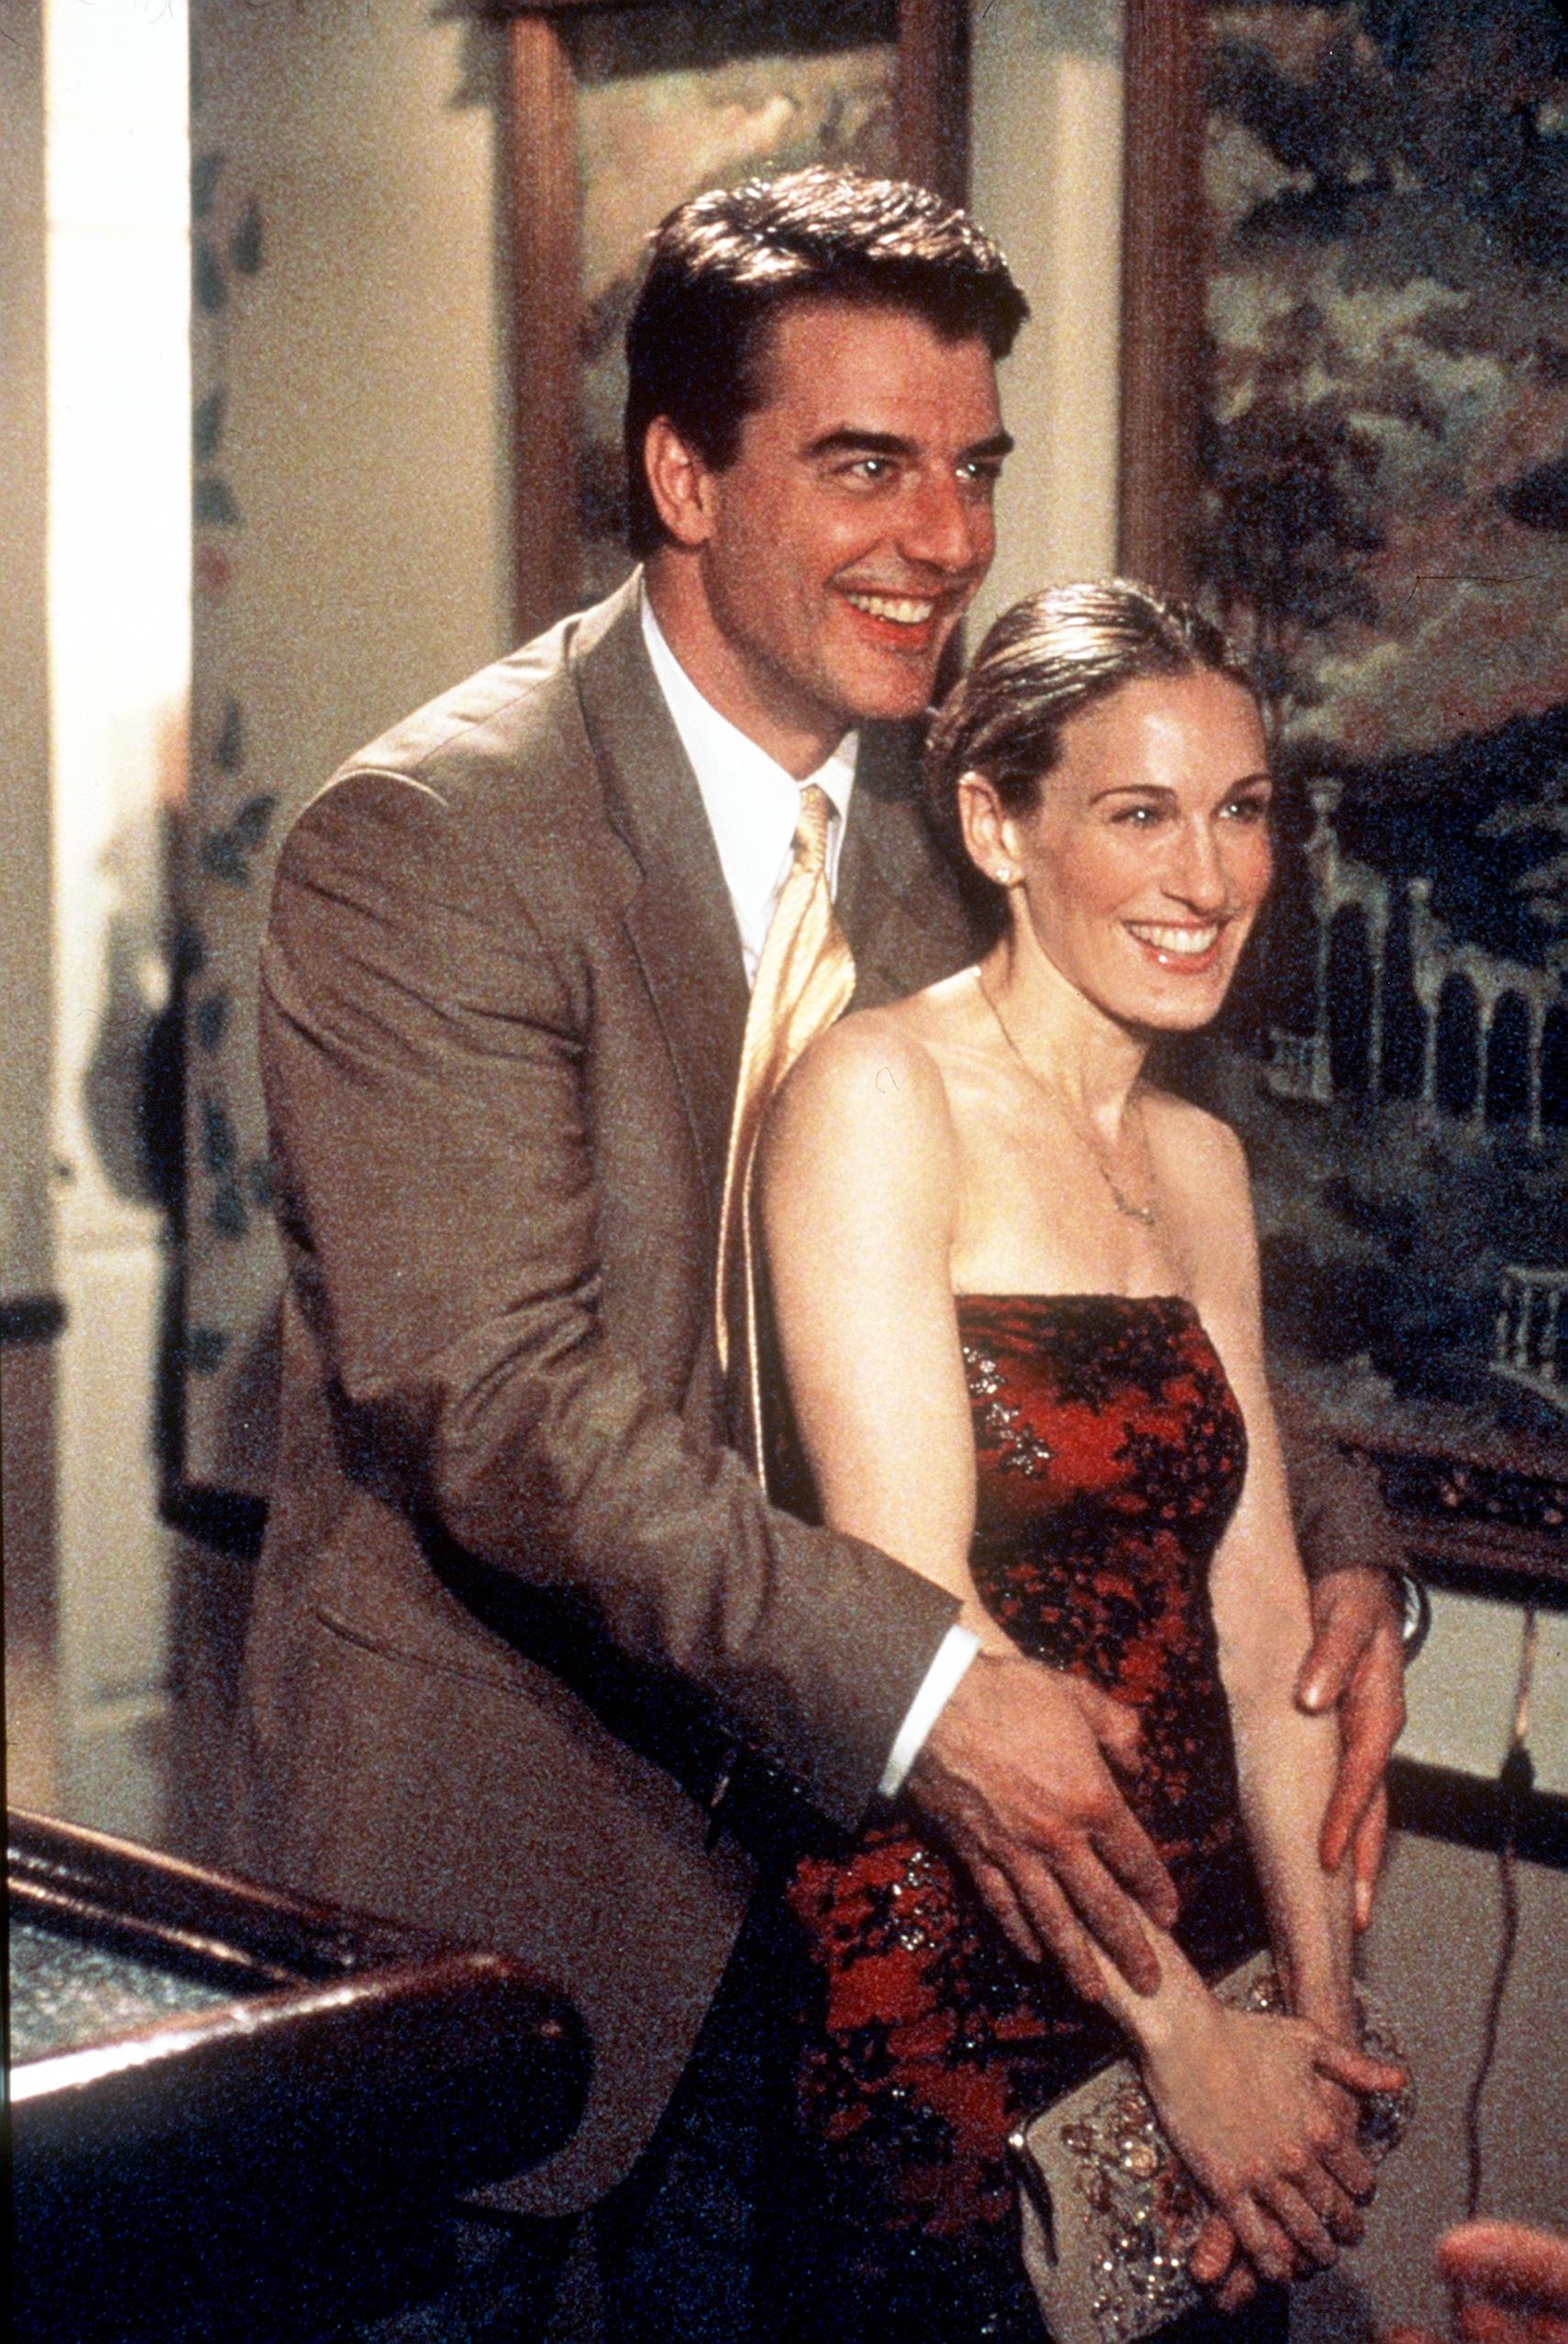 Chris Noth, as Mr. Big, hugs Sarah Jessica Parker as Carrie Bradshaw, from behind in a season 2 scene from 'Sex and the City' 